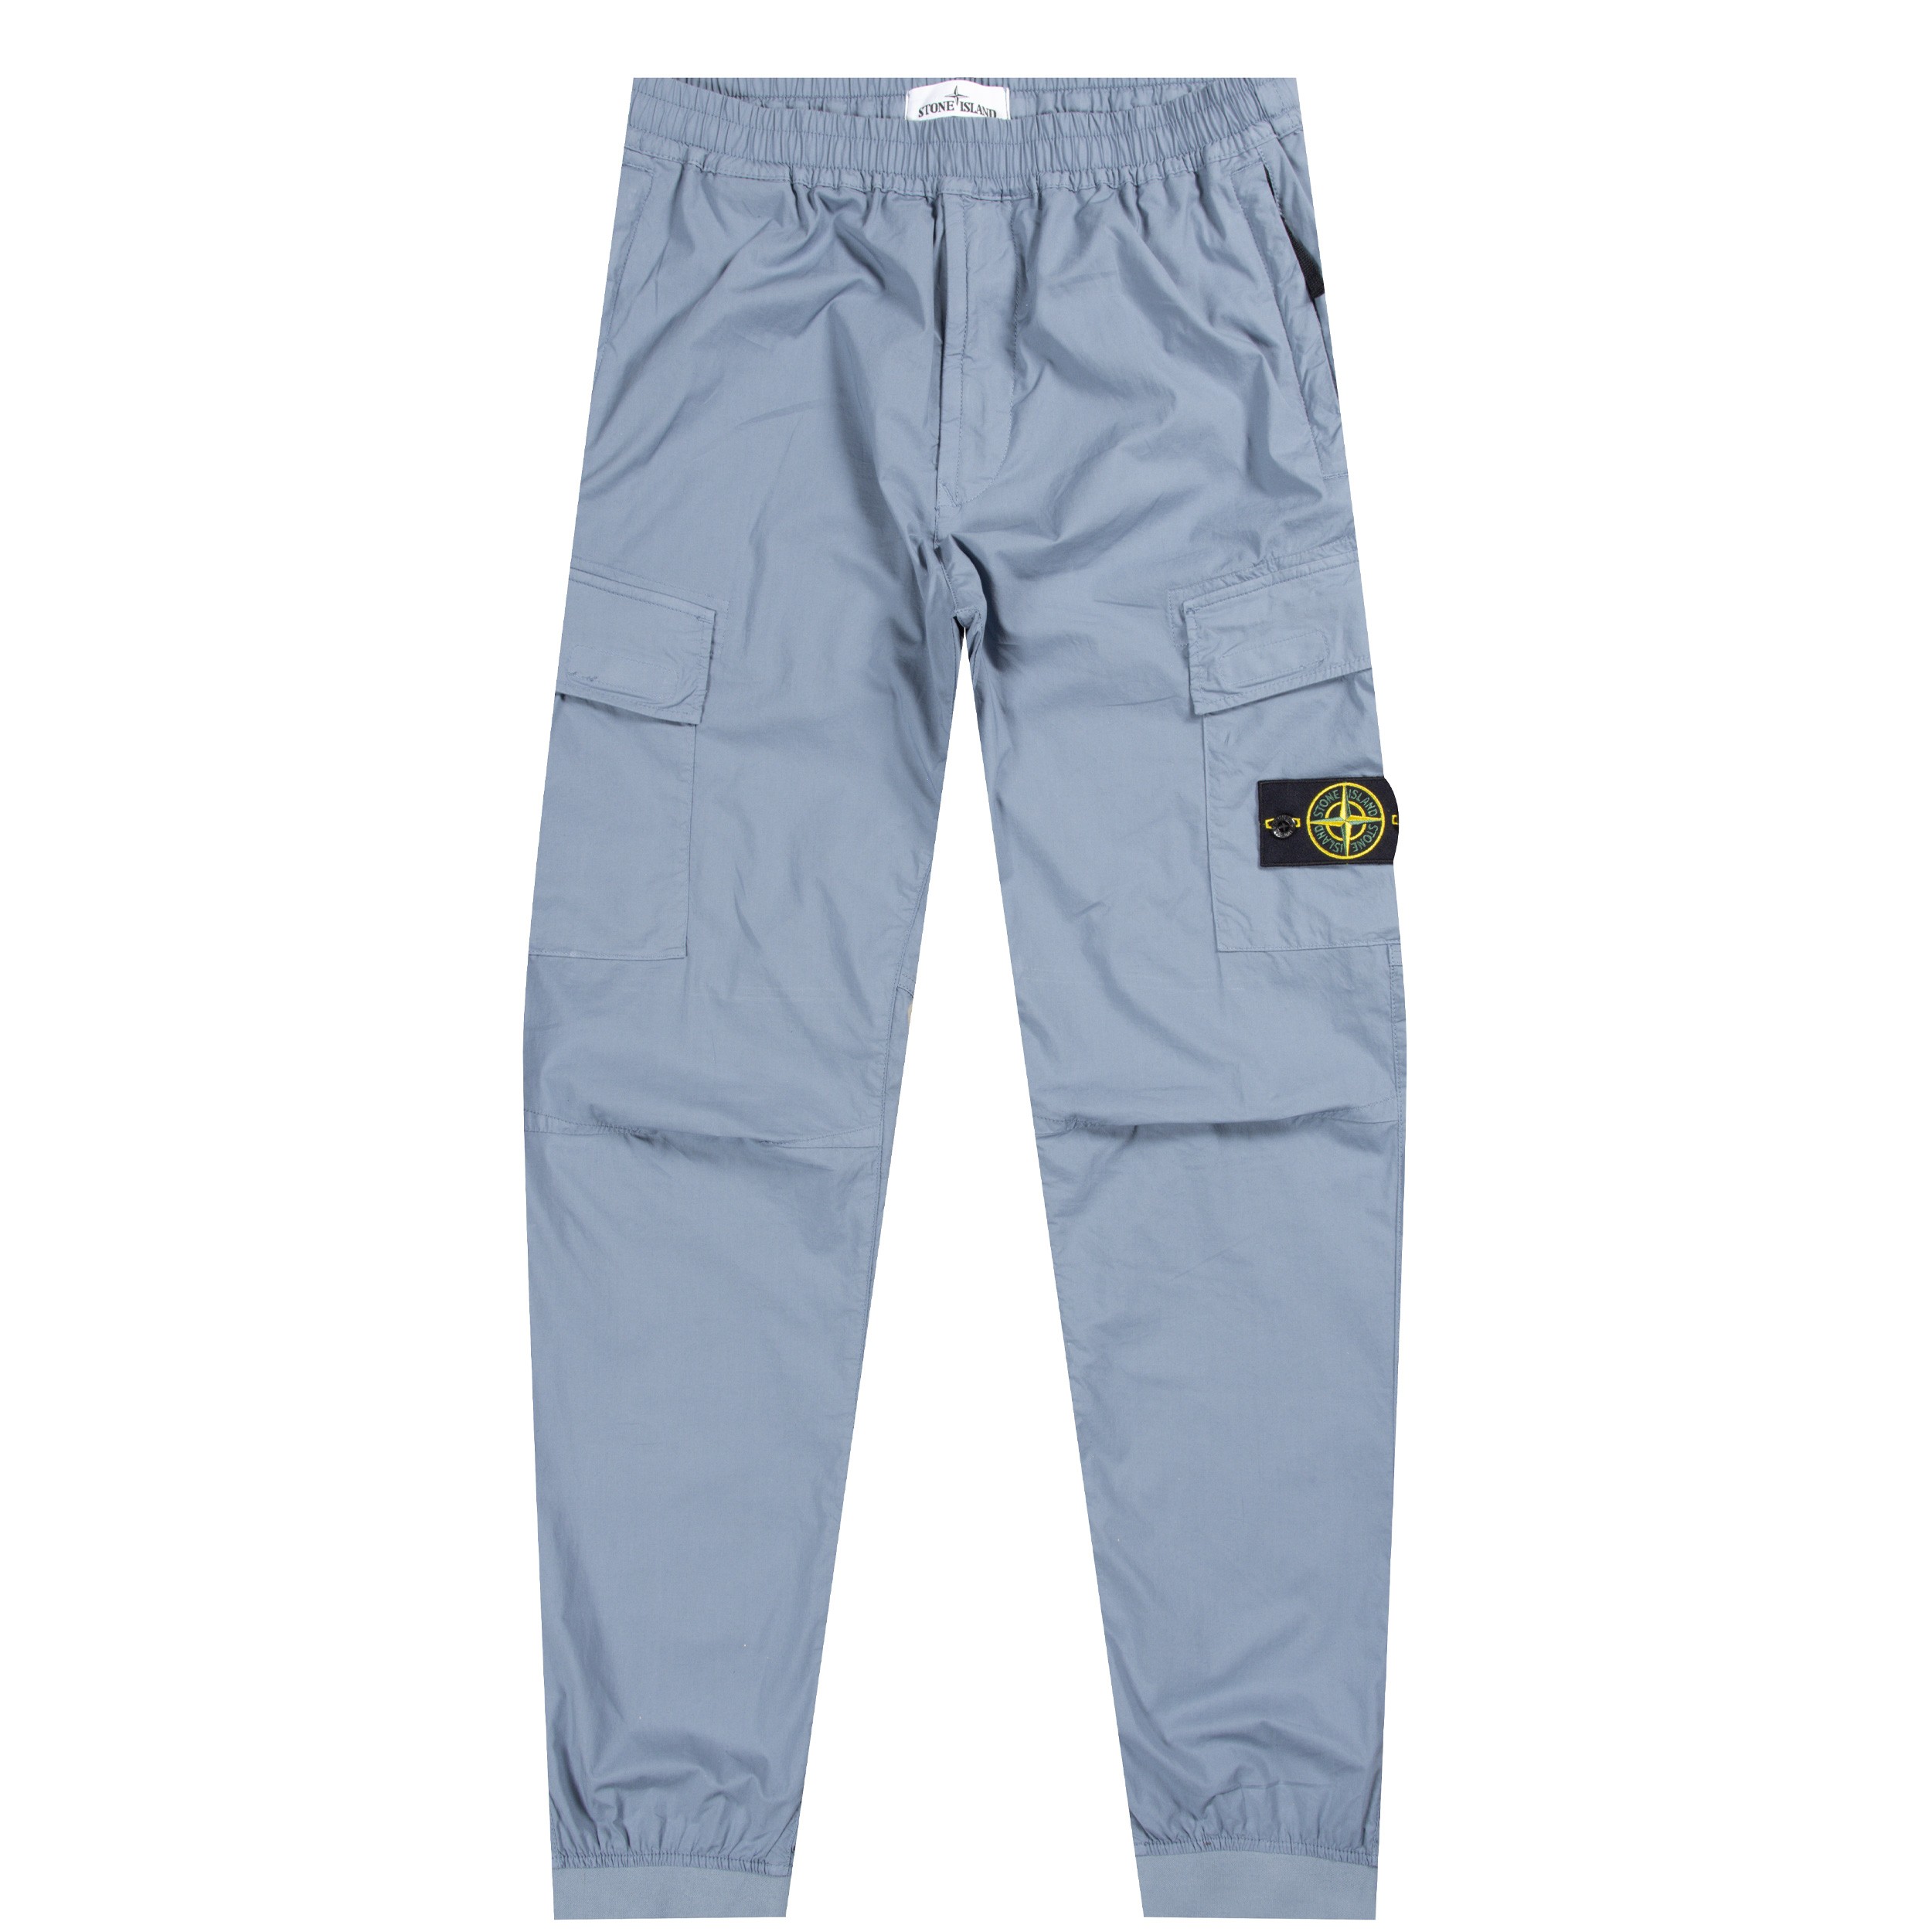 Stone Island Cargo Pants Review  On Body Wool Satin Olive Green  YouTube